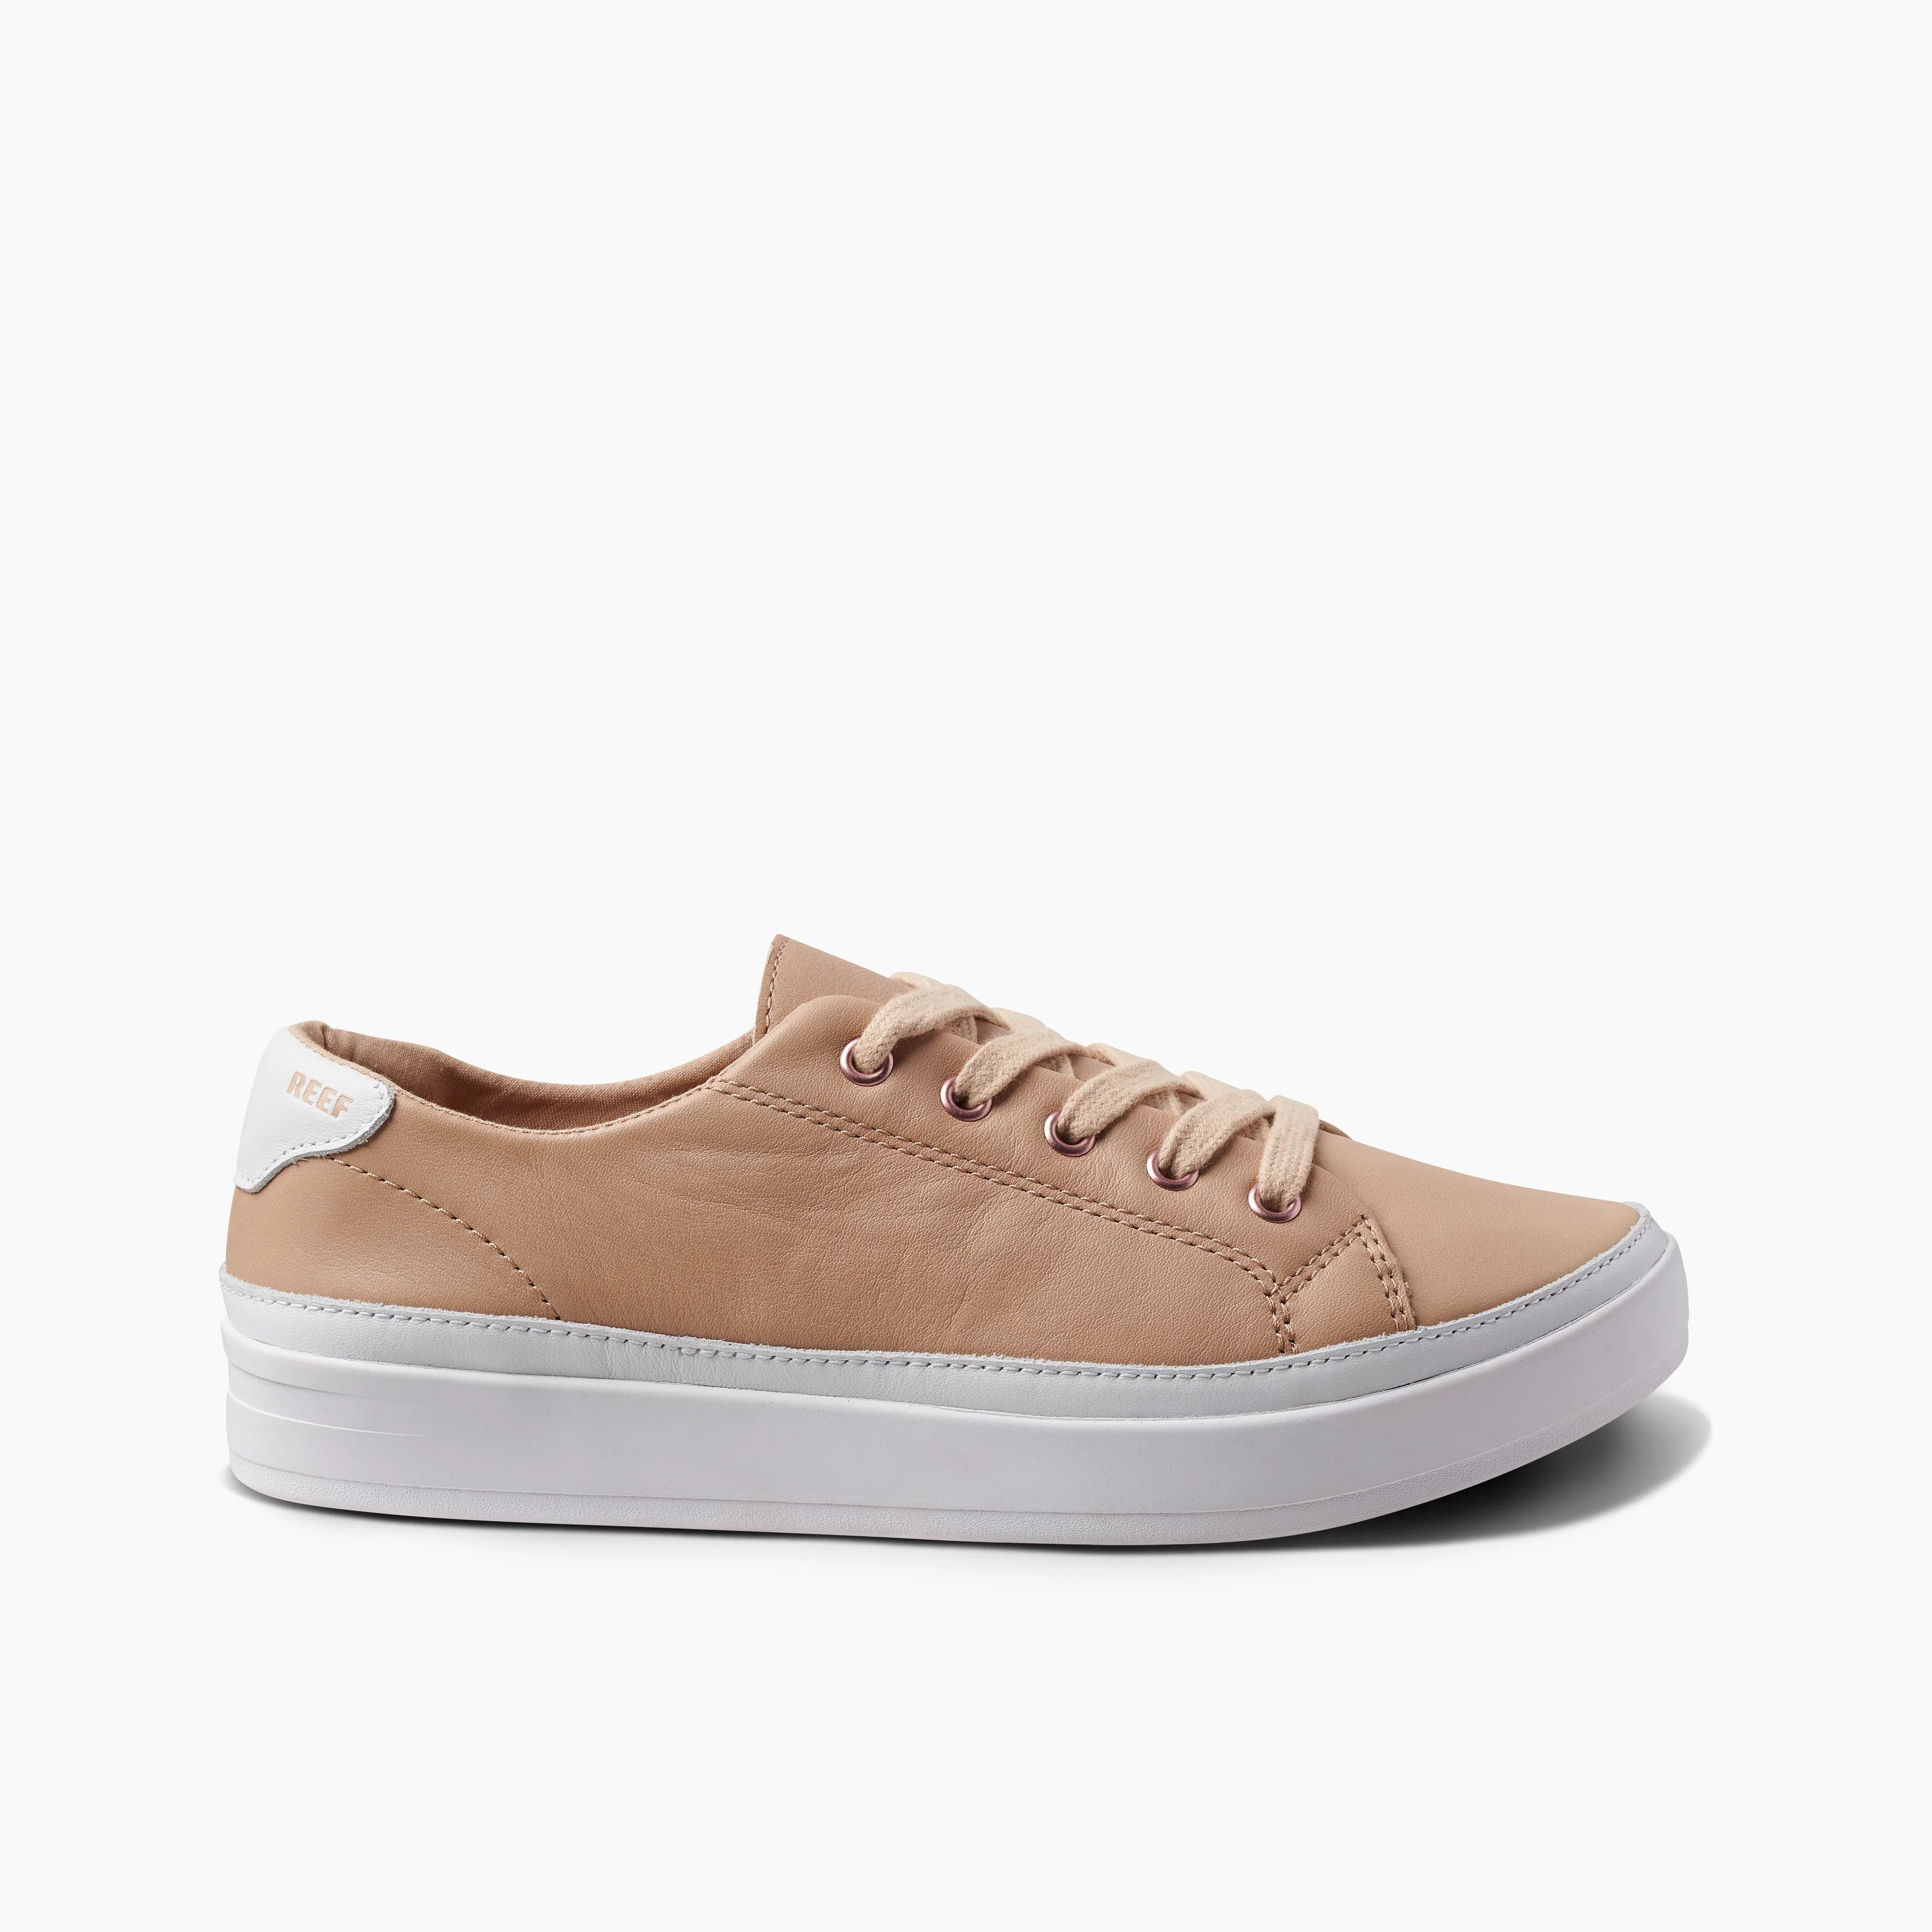 Women's Cushion Sunset Shoes in Sand | REEF® | Reef